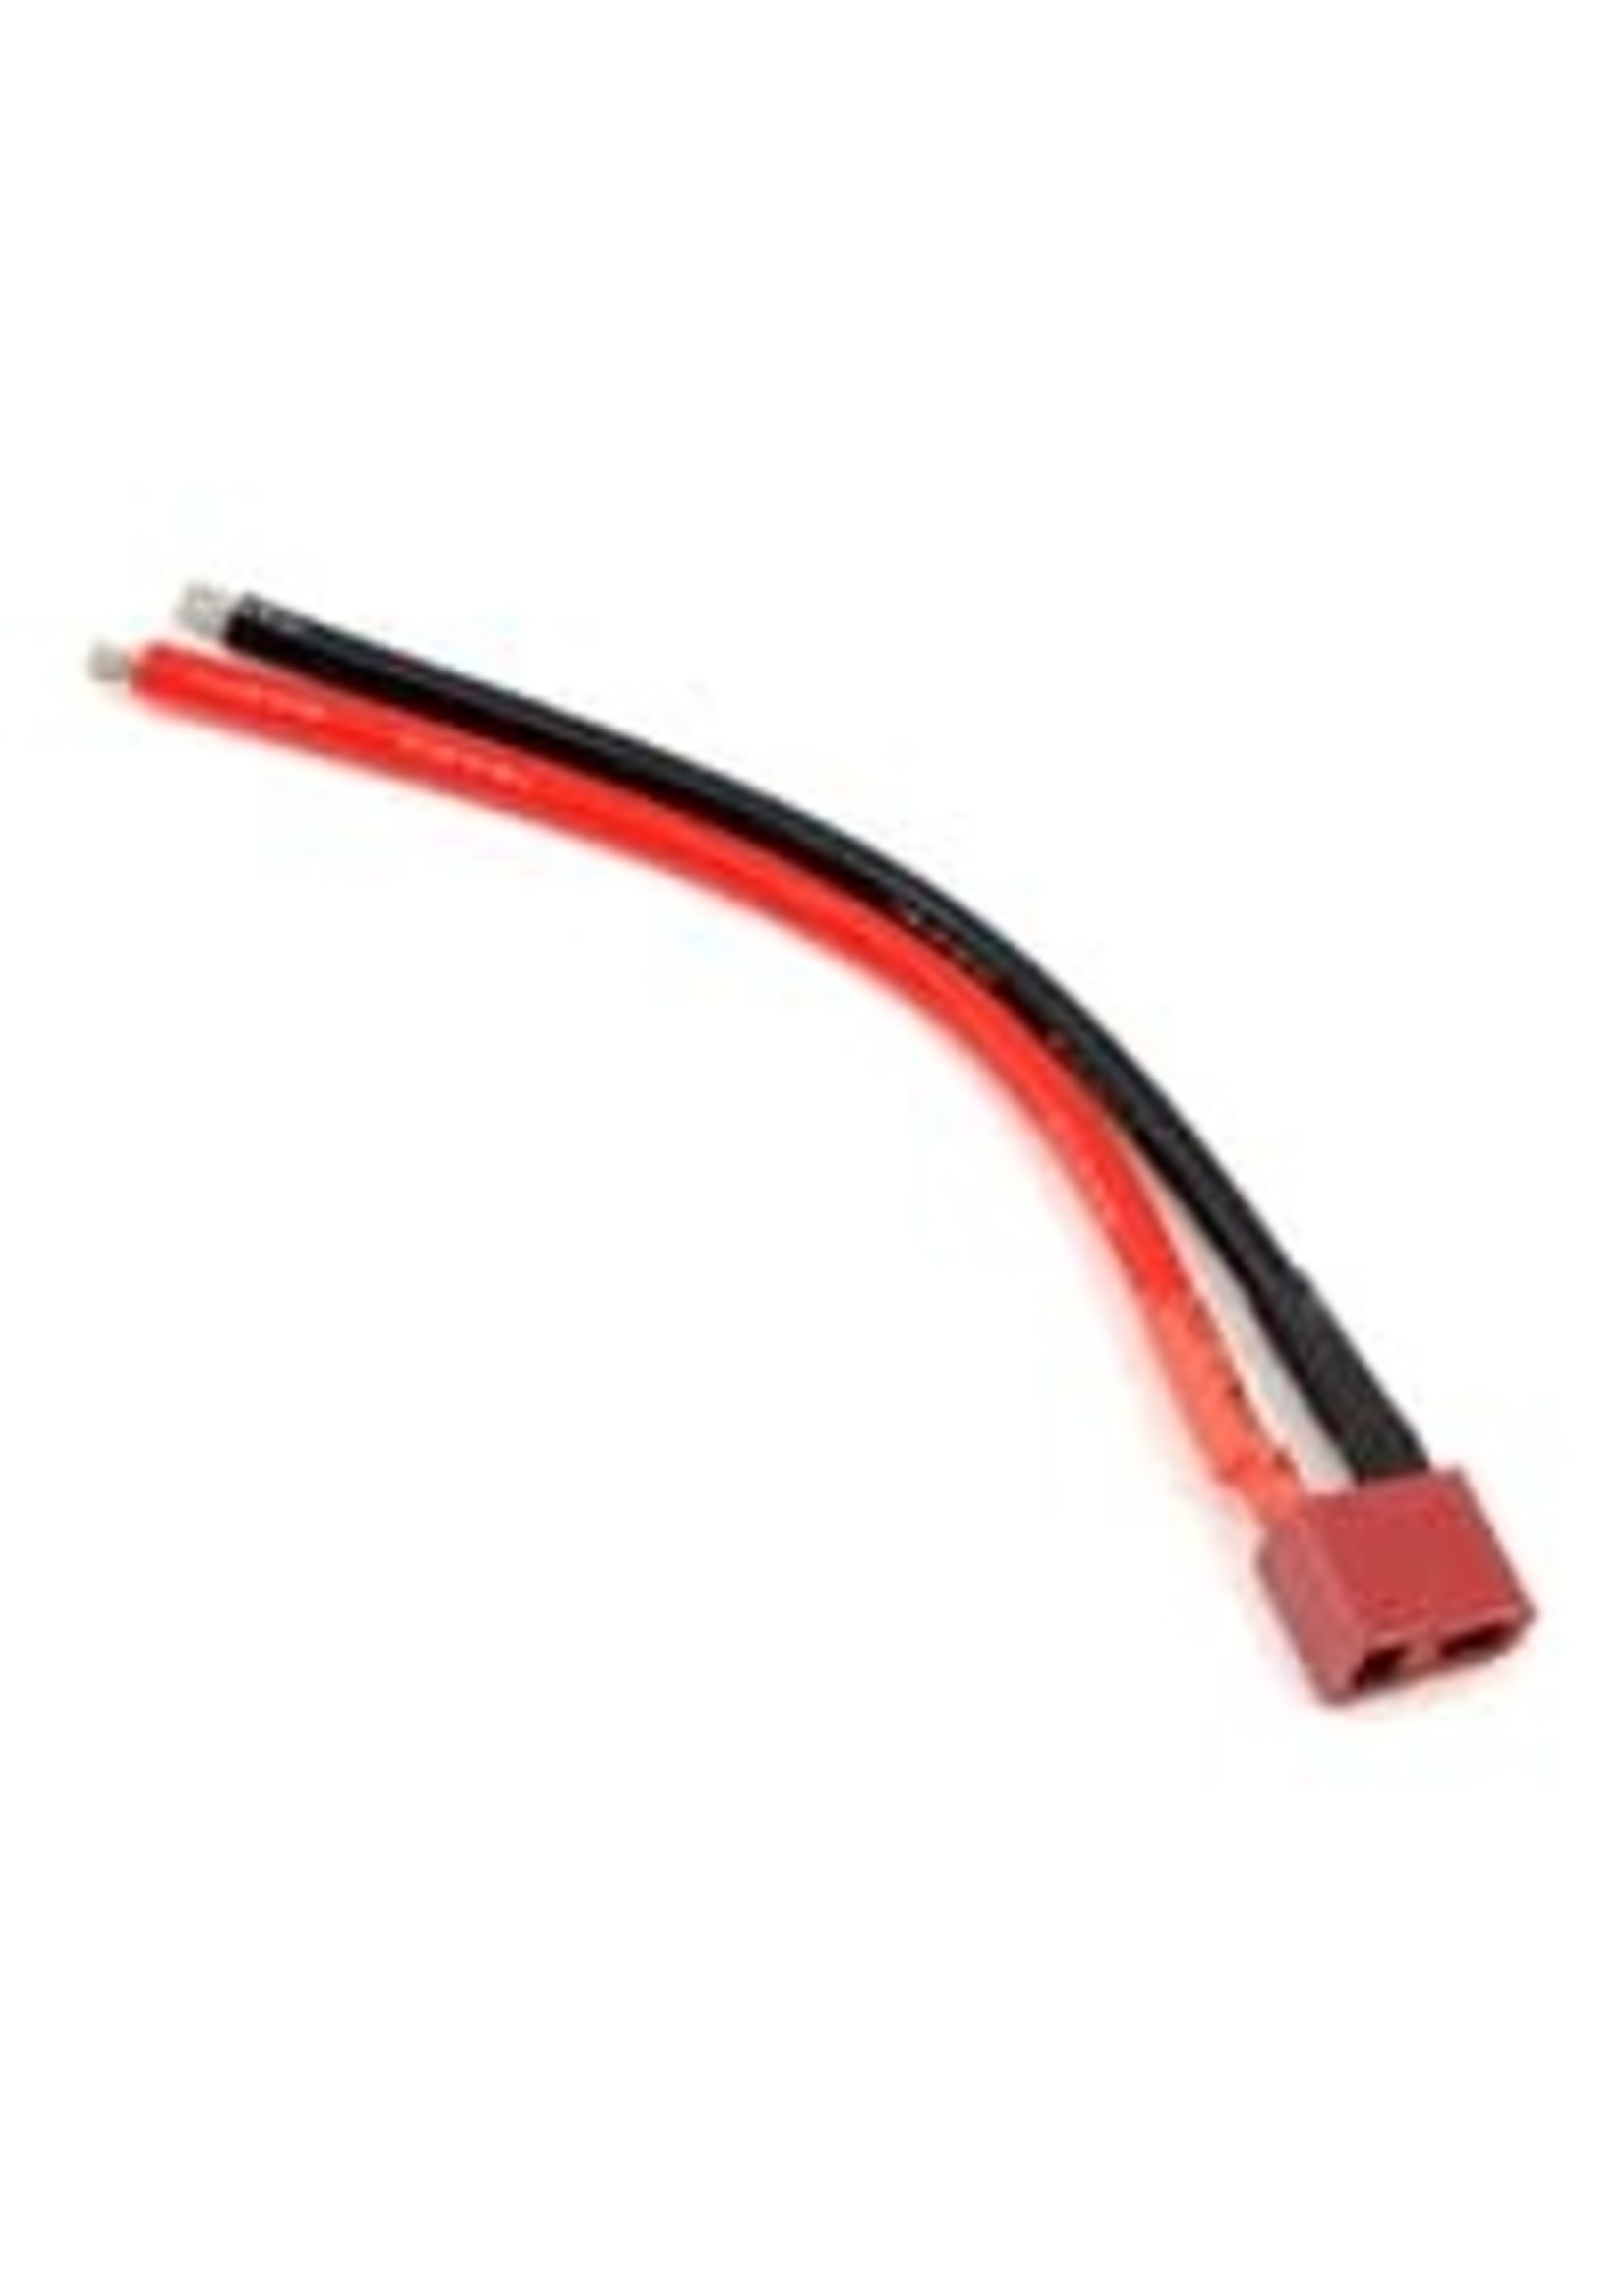 ProTek RC PTK-5200 ProTek RC T-Style Ultra Plug Female Battery Pigtail (10cm, 14awg wire) (1)